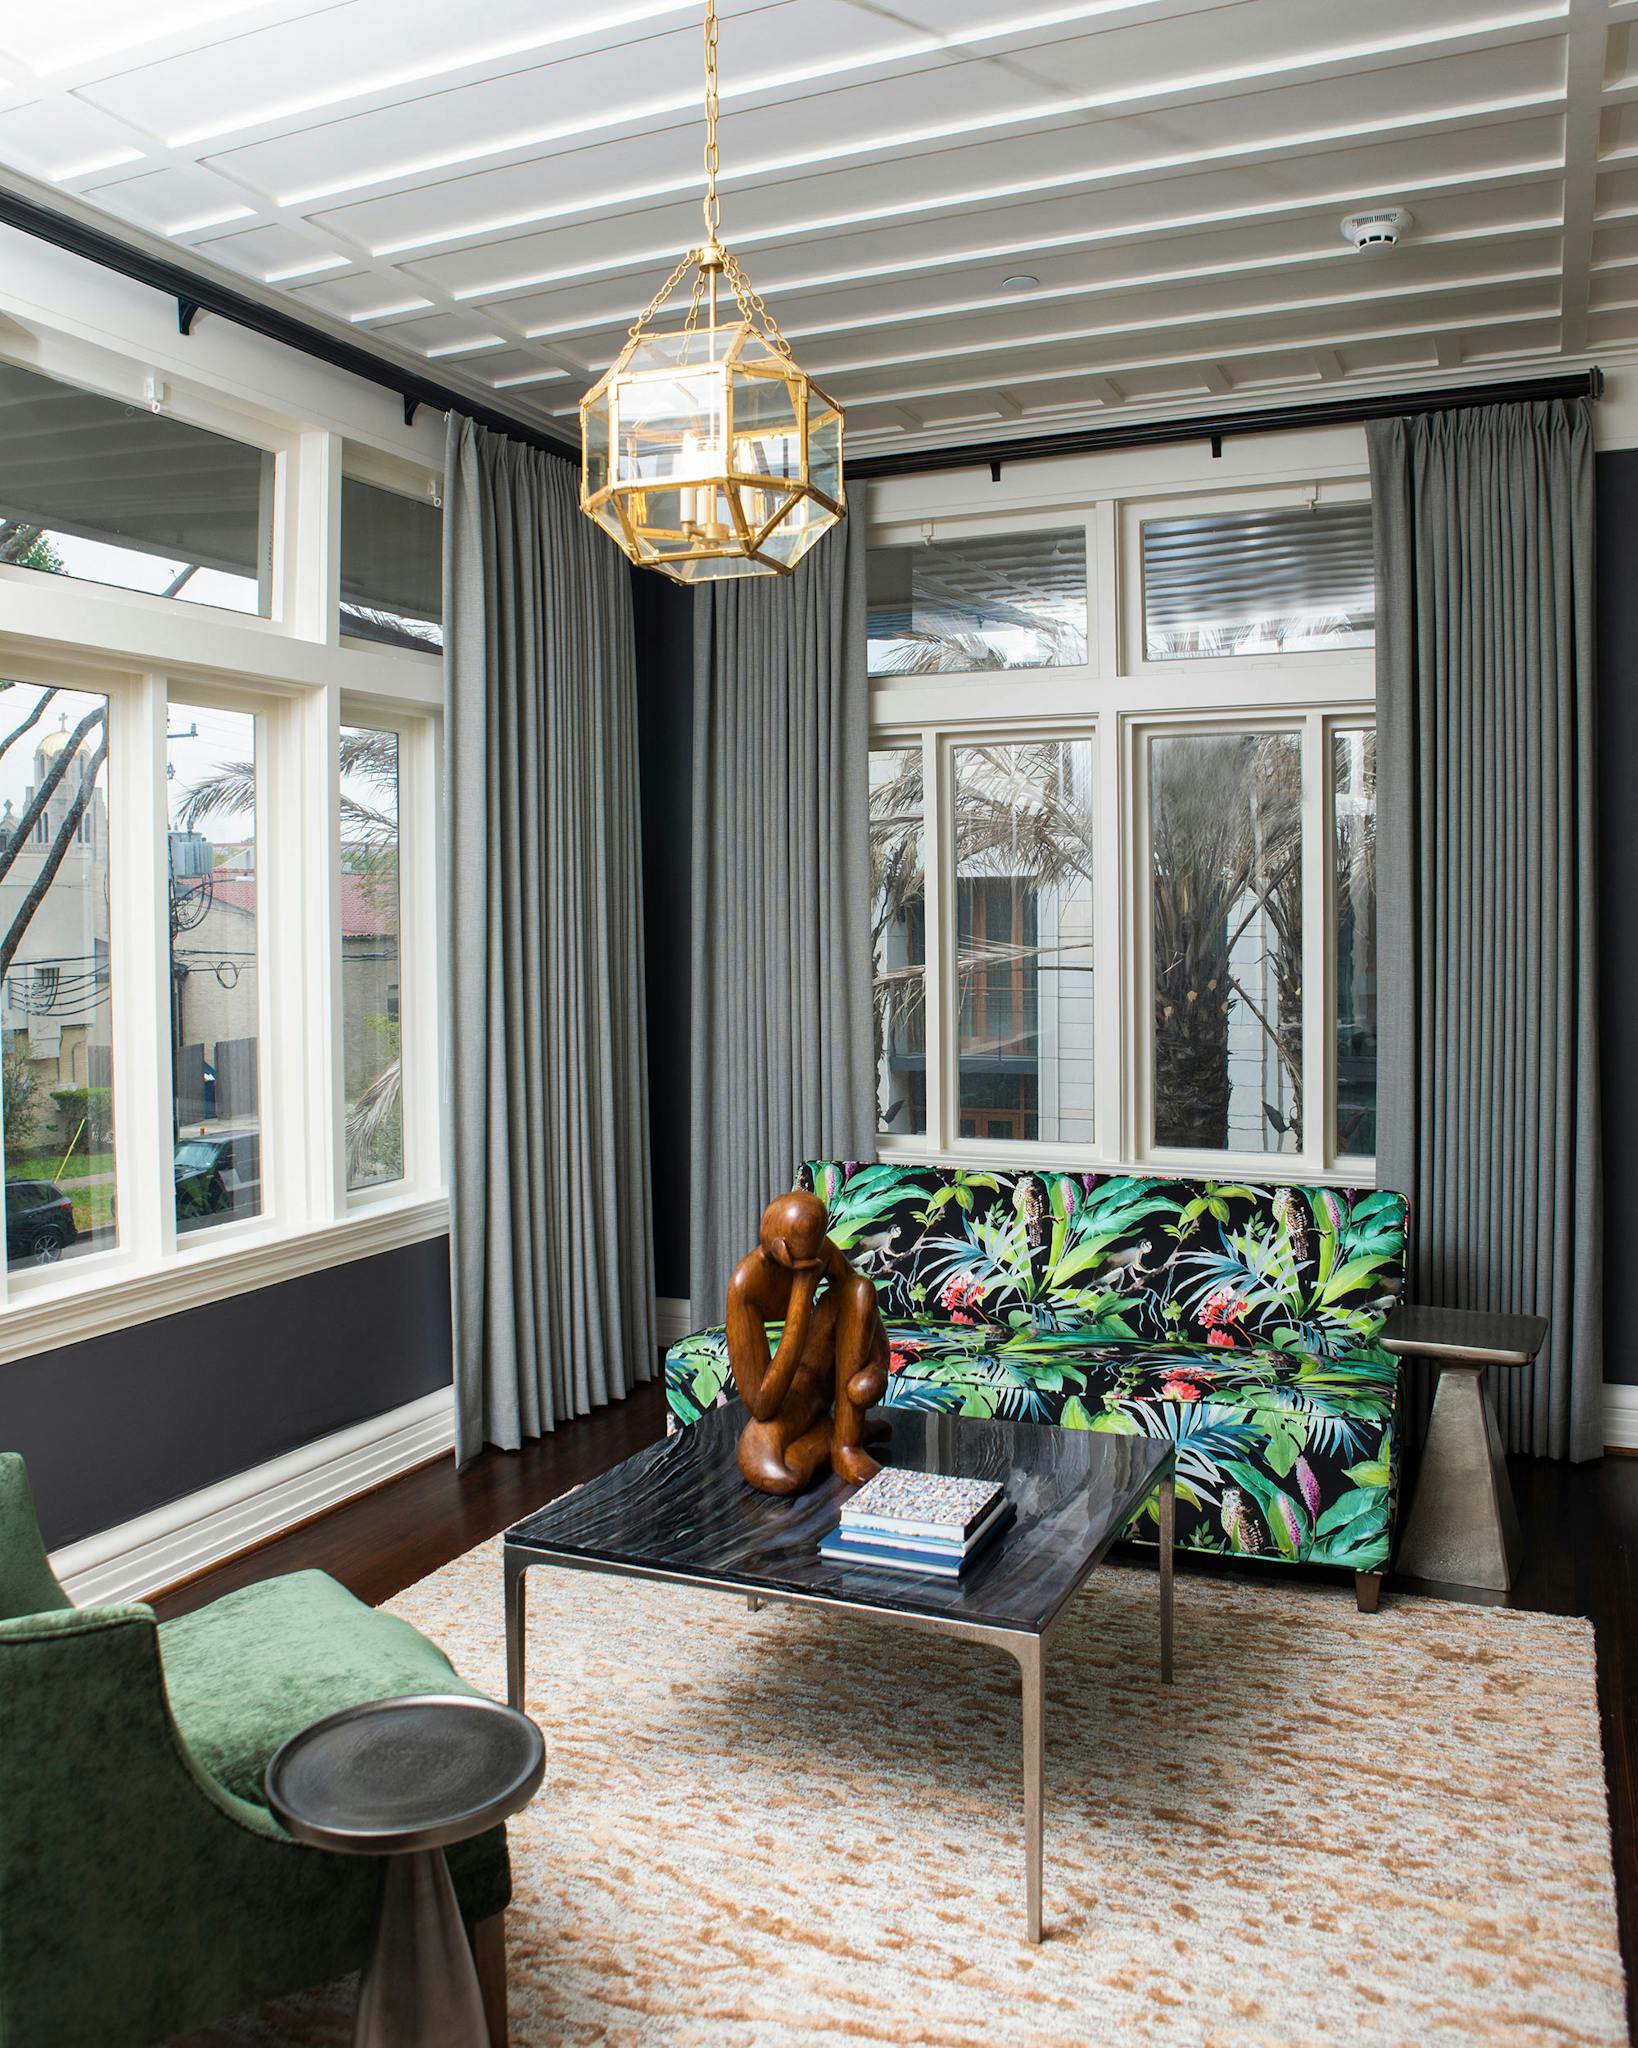 Each of the mansion’s five suites has an original sleeping porch that has been transformed into a private sunroom.